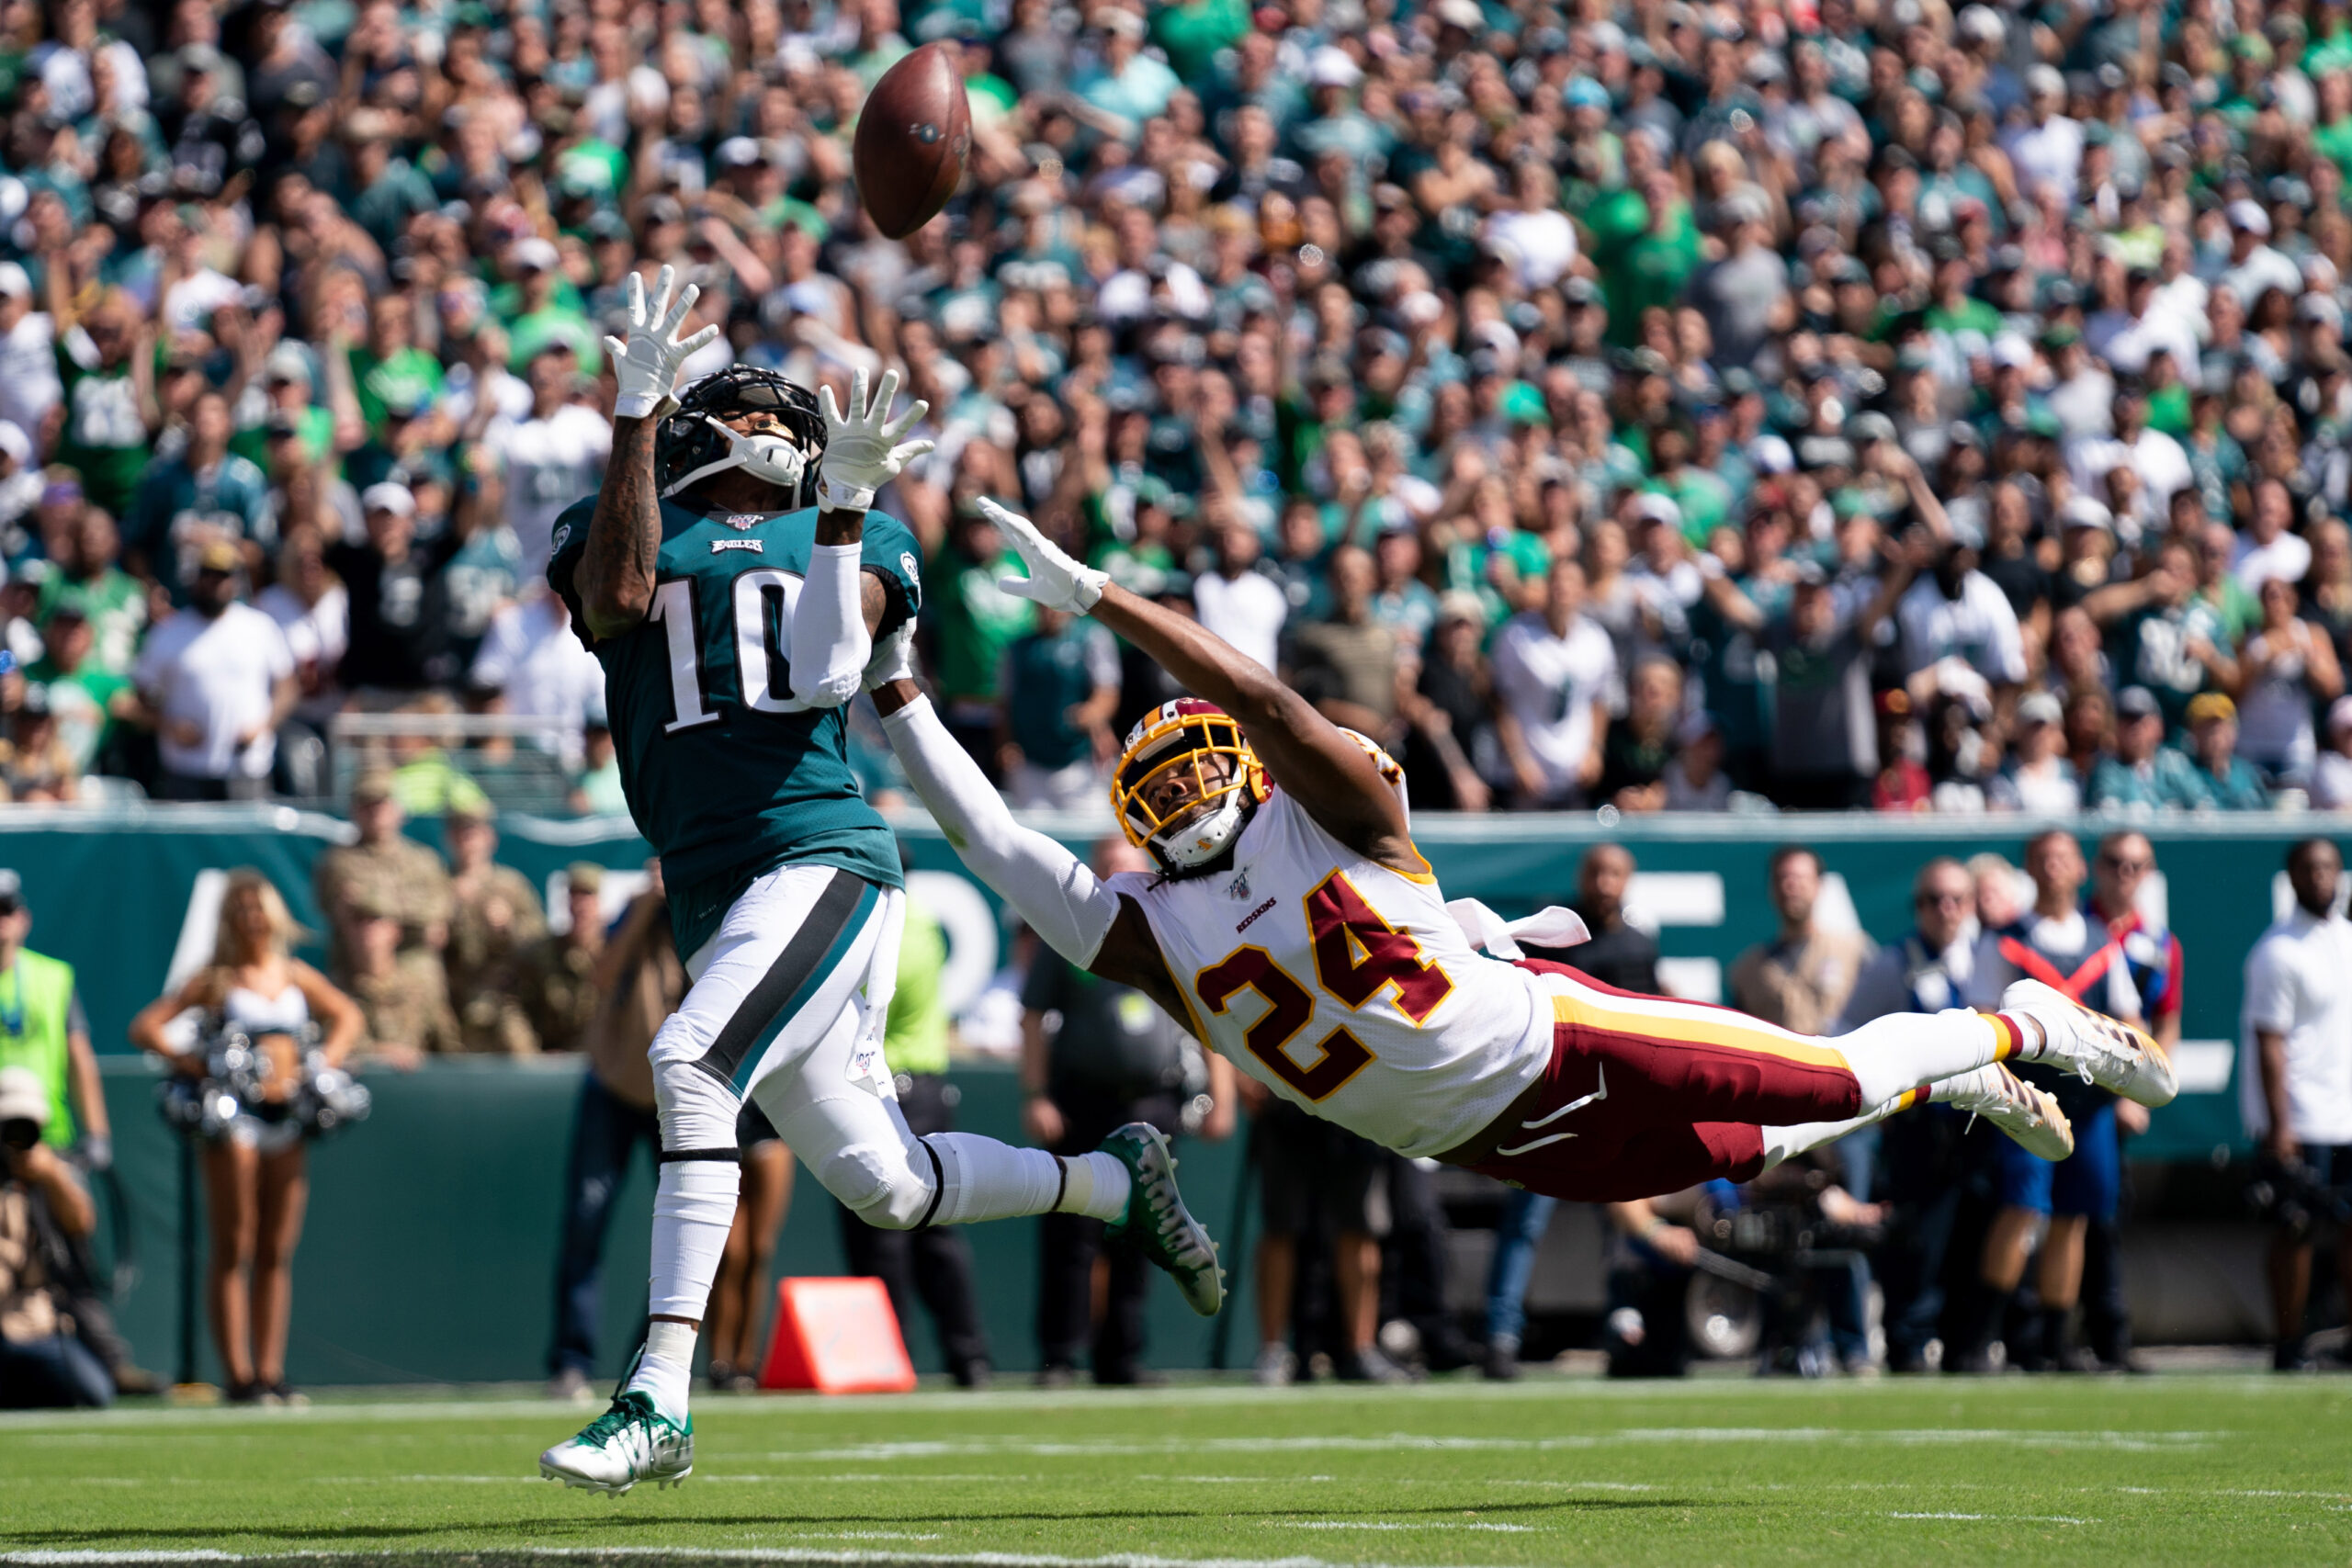 Former Eagles’ WR DeSean Jackson to retire from the NFL after 15 seasons